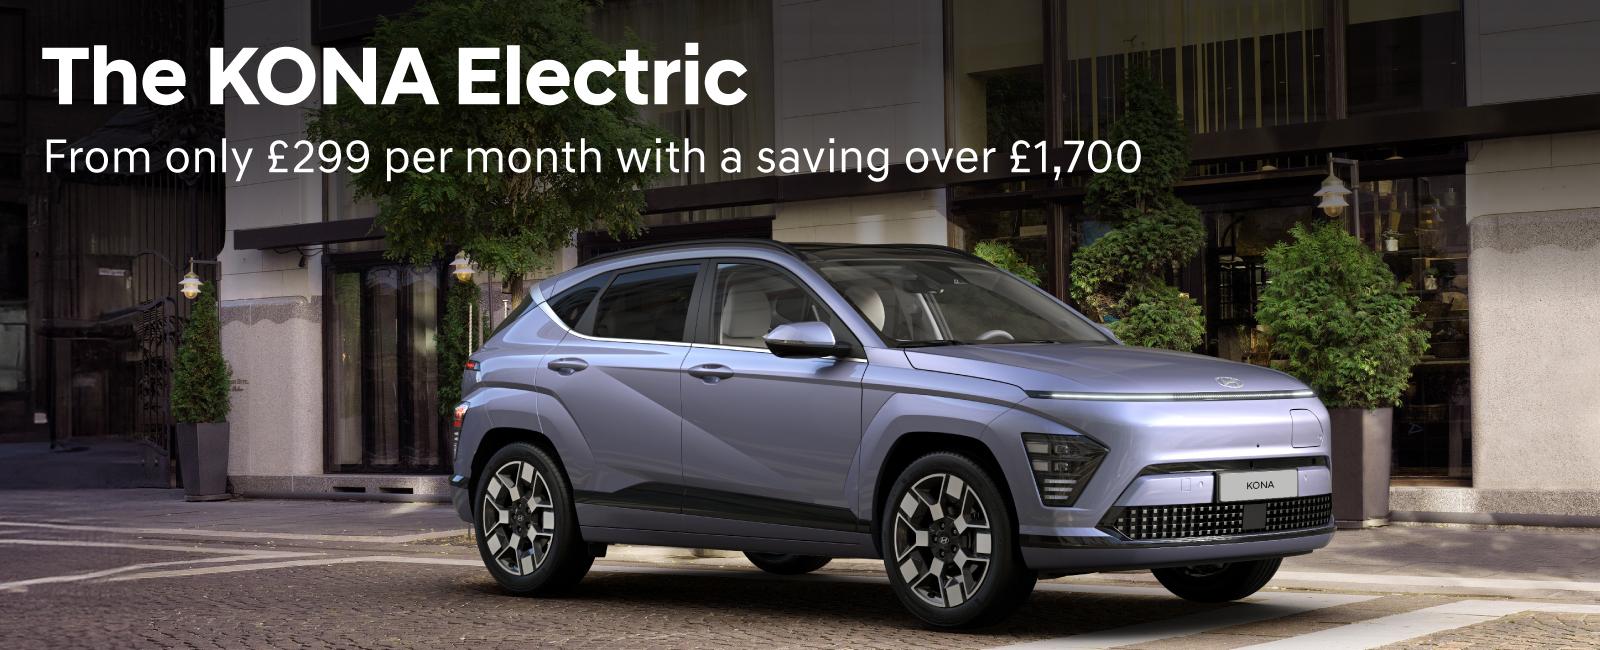 The Hyundai KONA Electric from only £299 per month